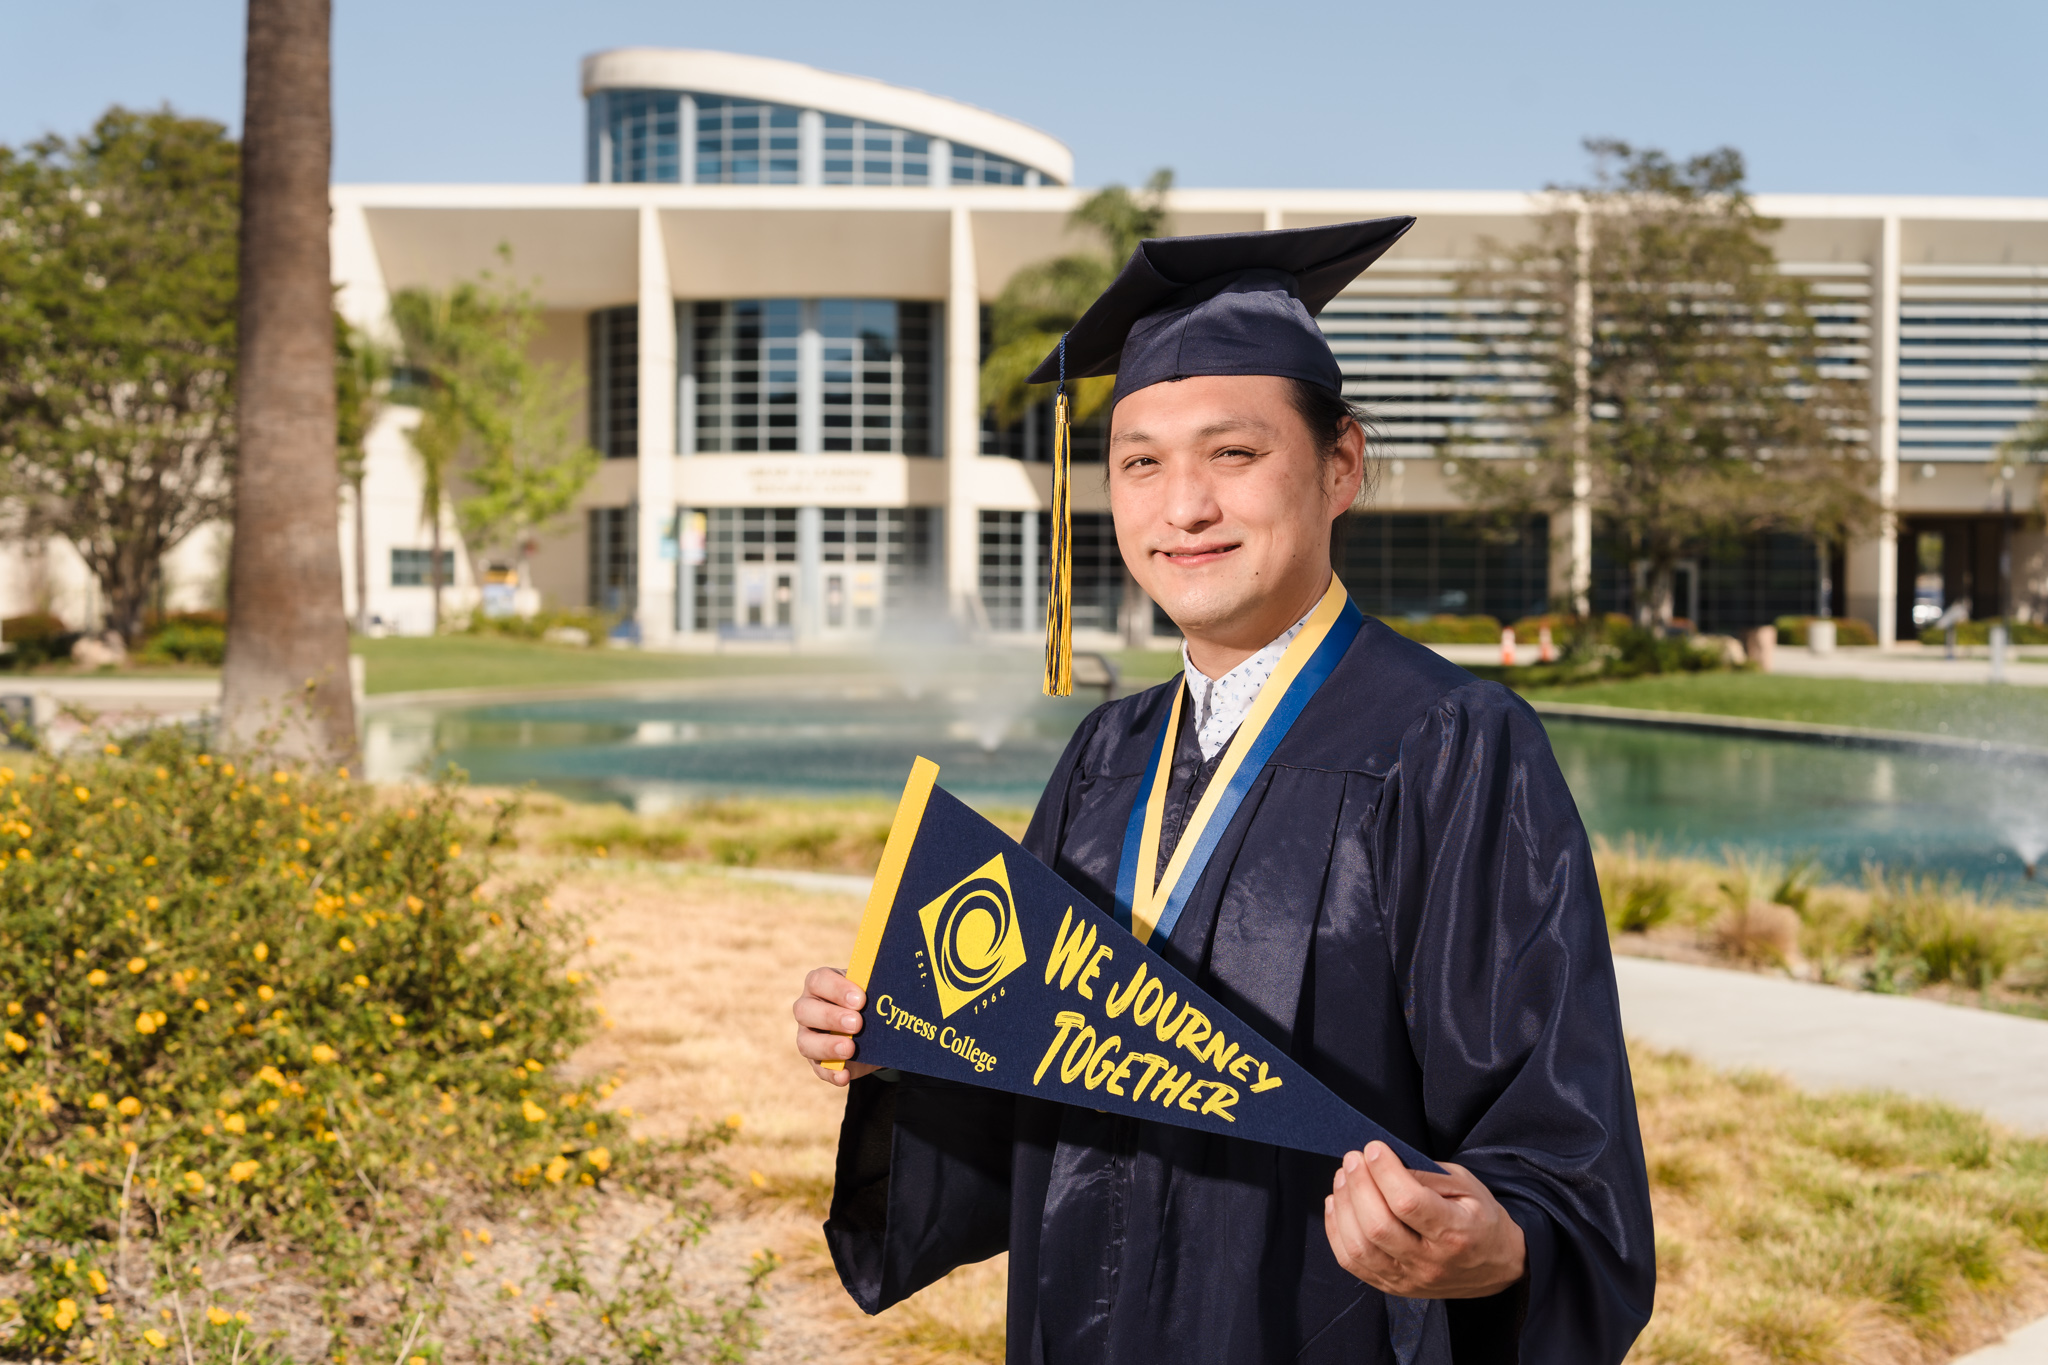 Culinary Arts student Dan Kim poses in graduation regalia in front of gonfalons for Cypress College and Career Technical Education